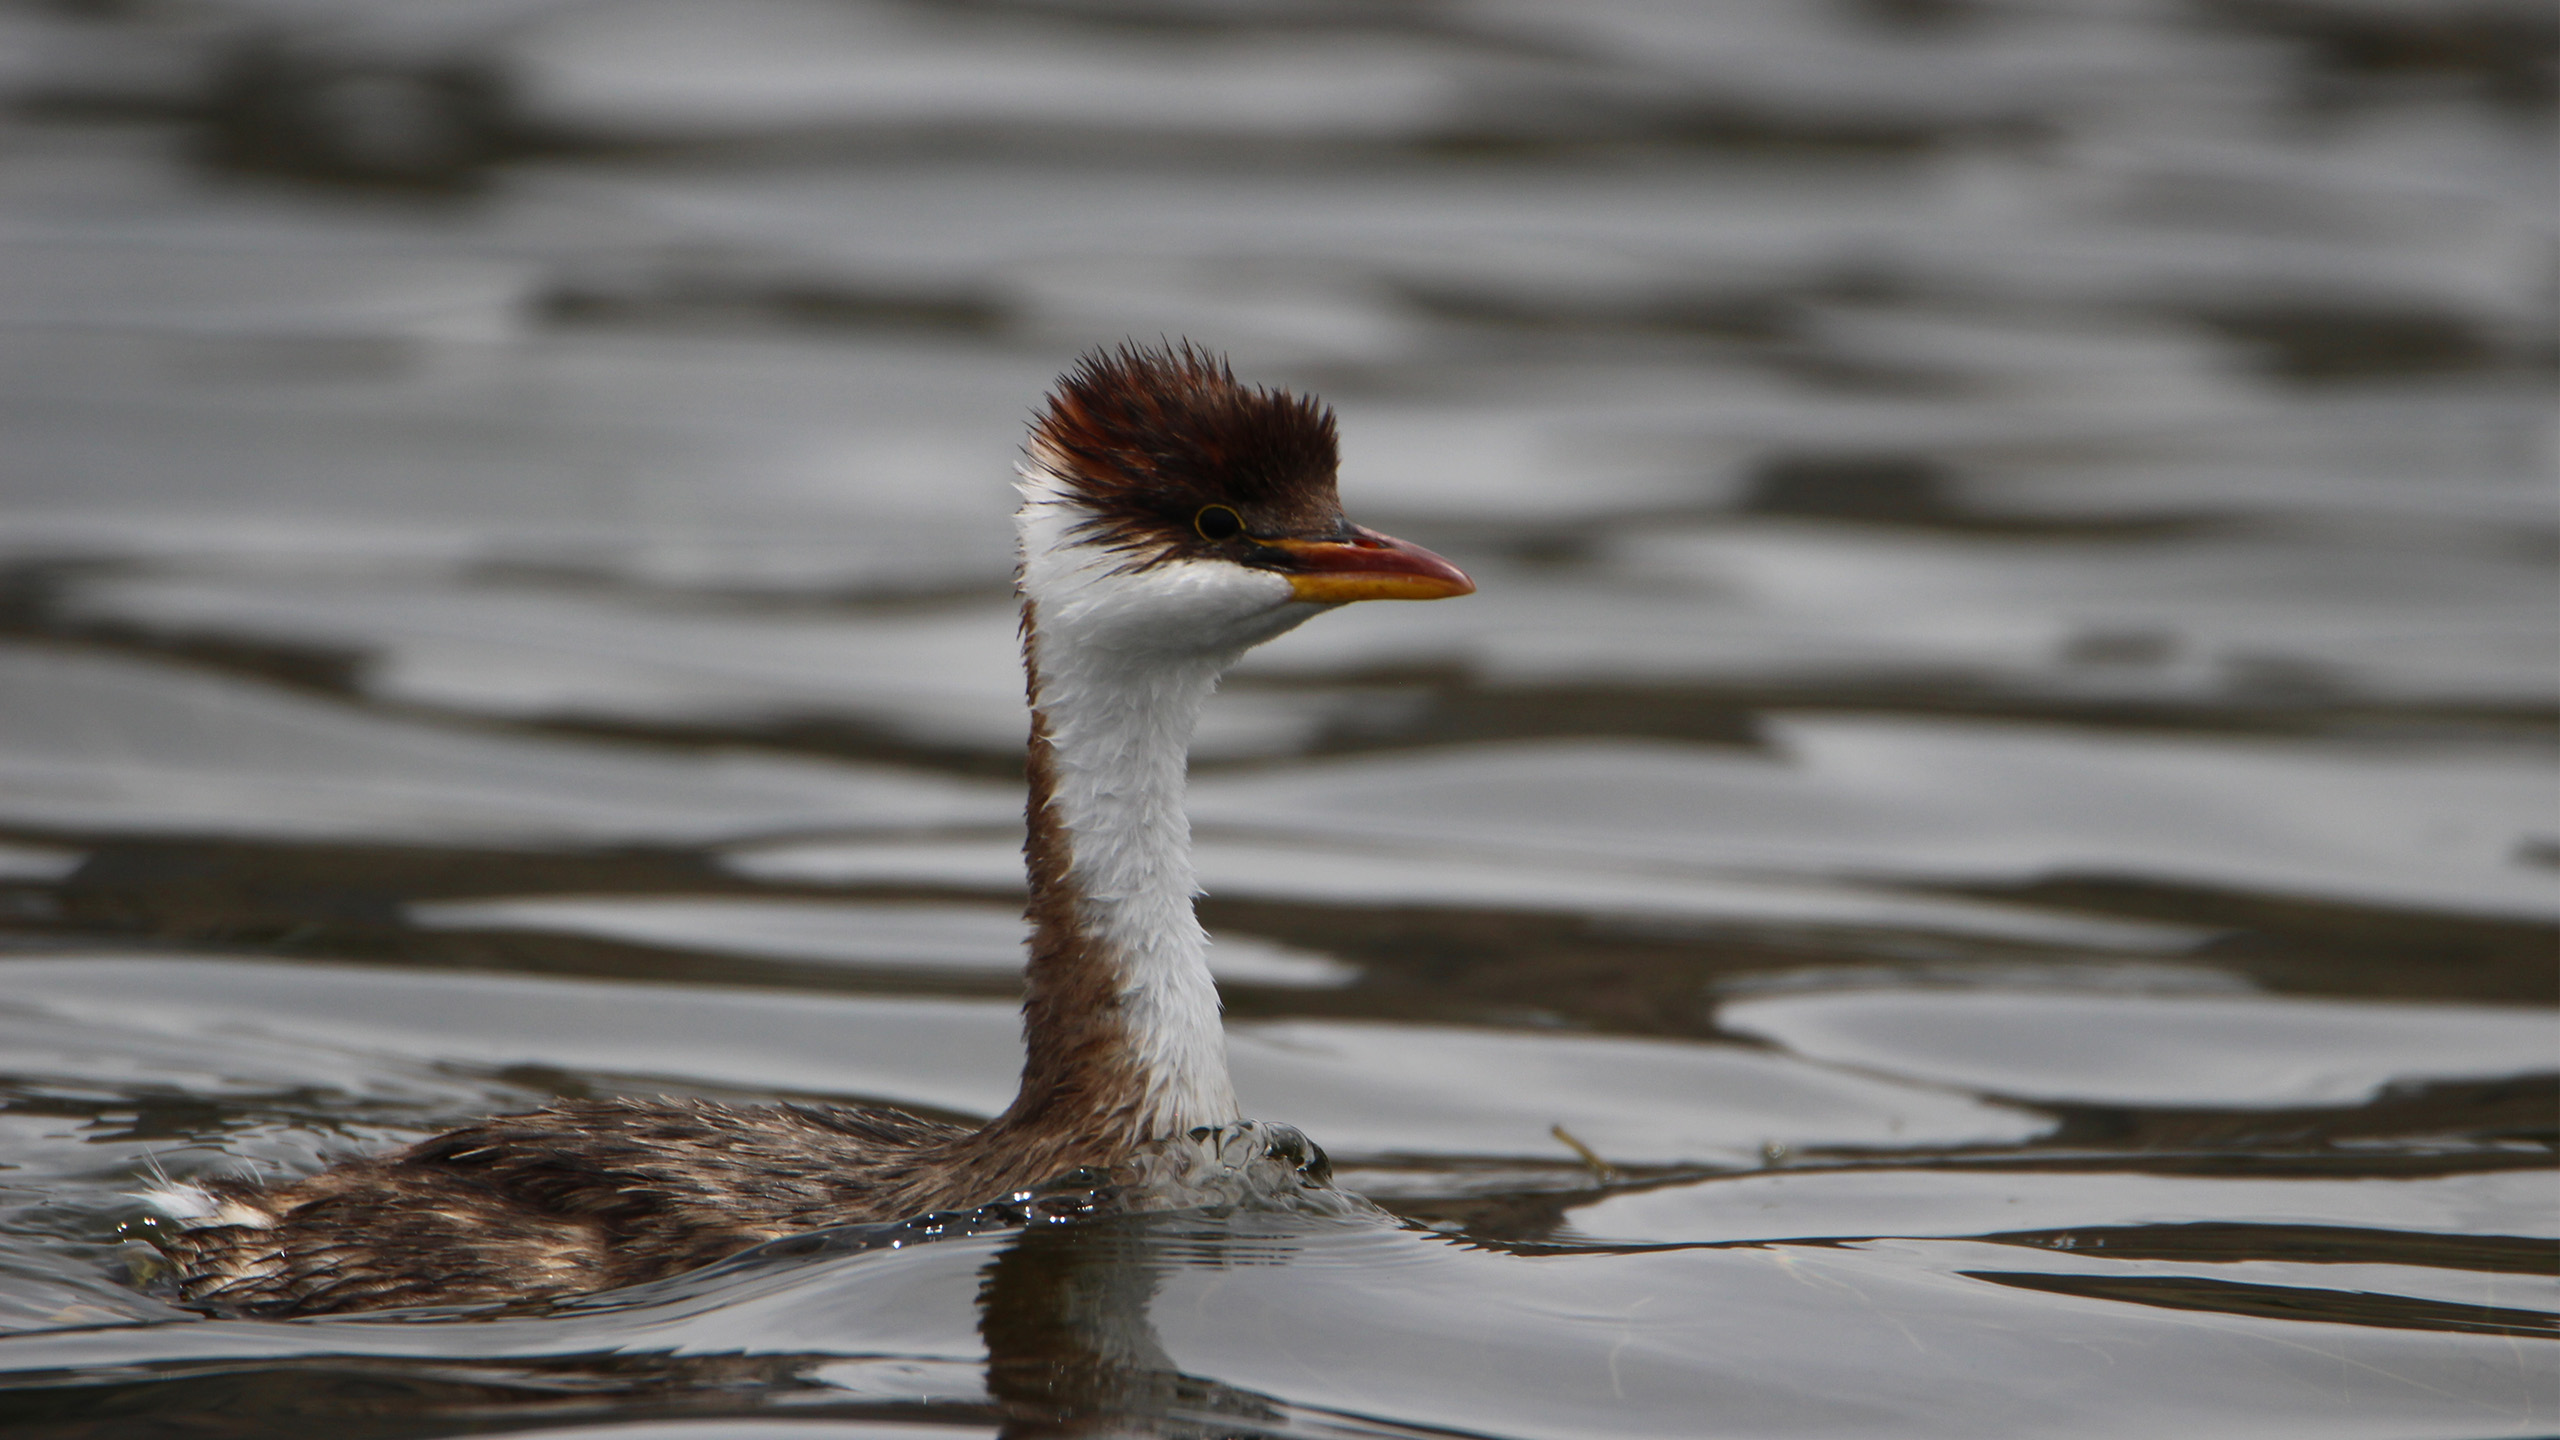 The Titicaca water frog is not the only endemic species of the lake. The Titicaca grebe is also found only here and in a few other neighboring lakes in the Altiplano. It is also considered critically endangered. | Darren Graham, Shutterstock